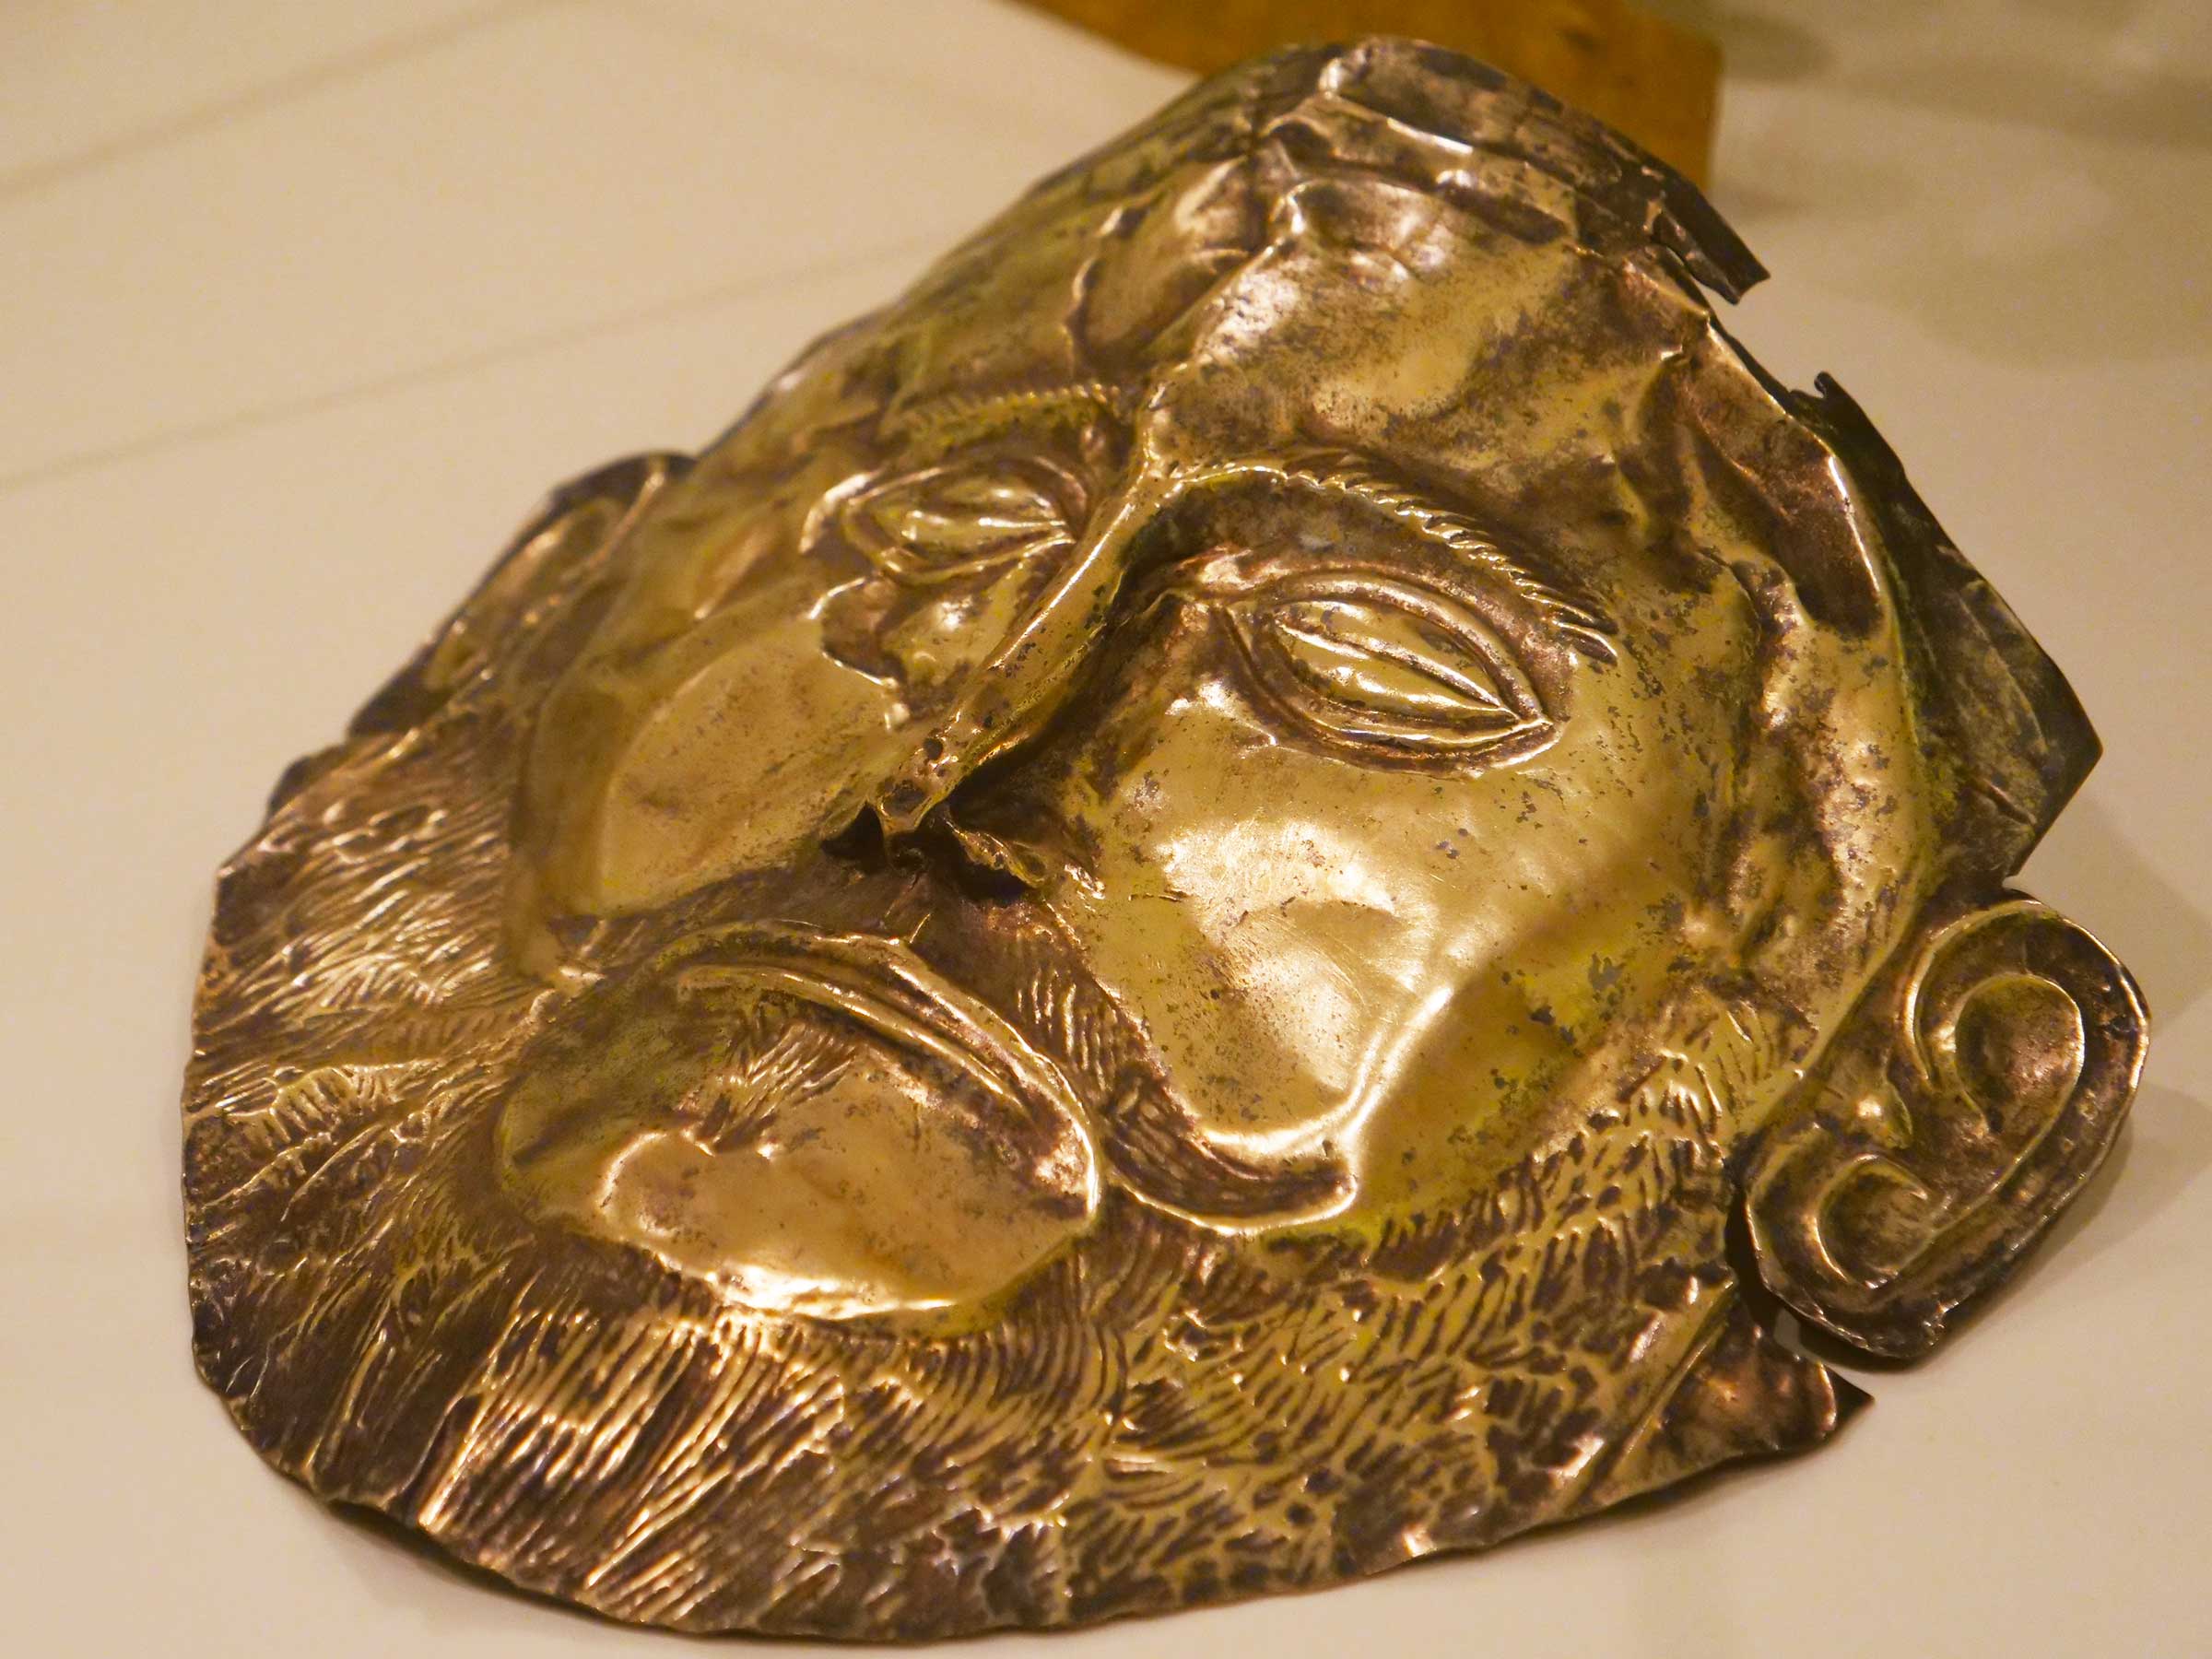 Gold Mask of Agamemnon | The Mycenaean Civilization | Bronze Age Greece | Dr Steven Andrew Martin | Greek Archaeology Research